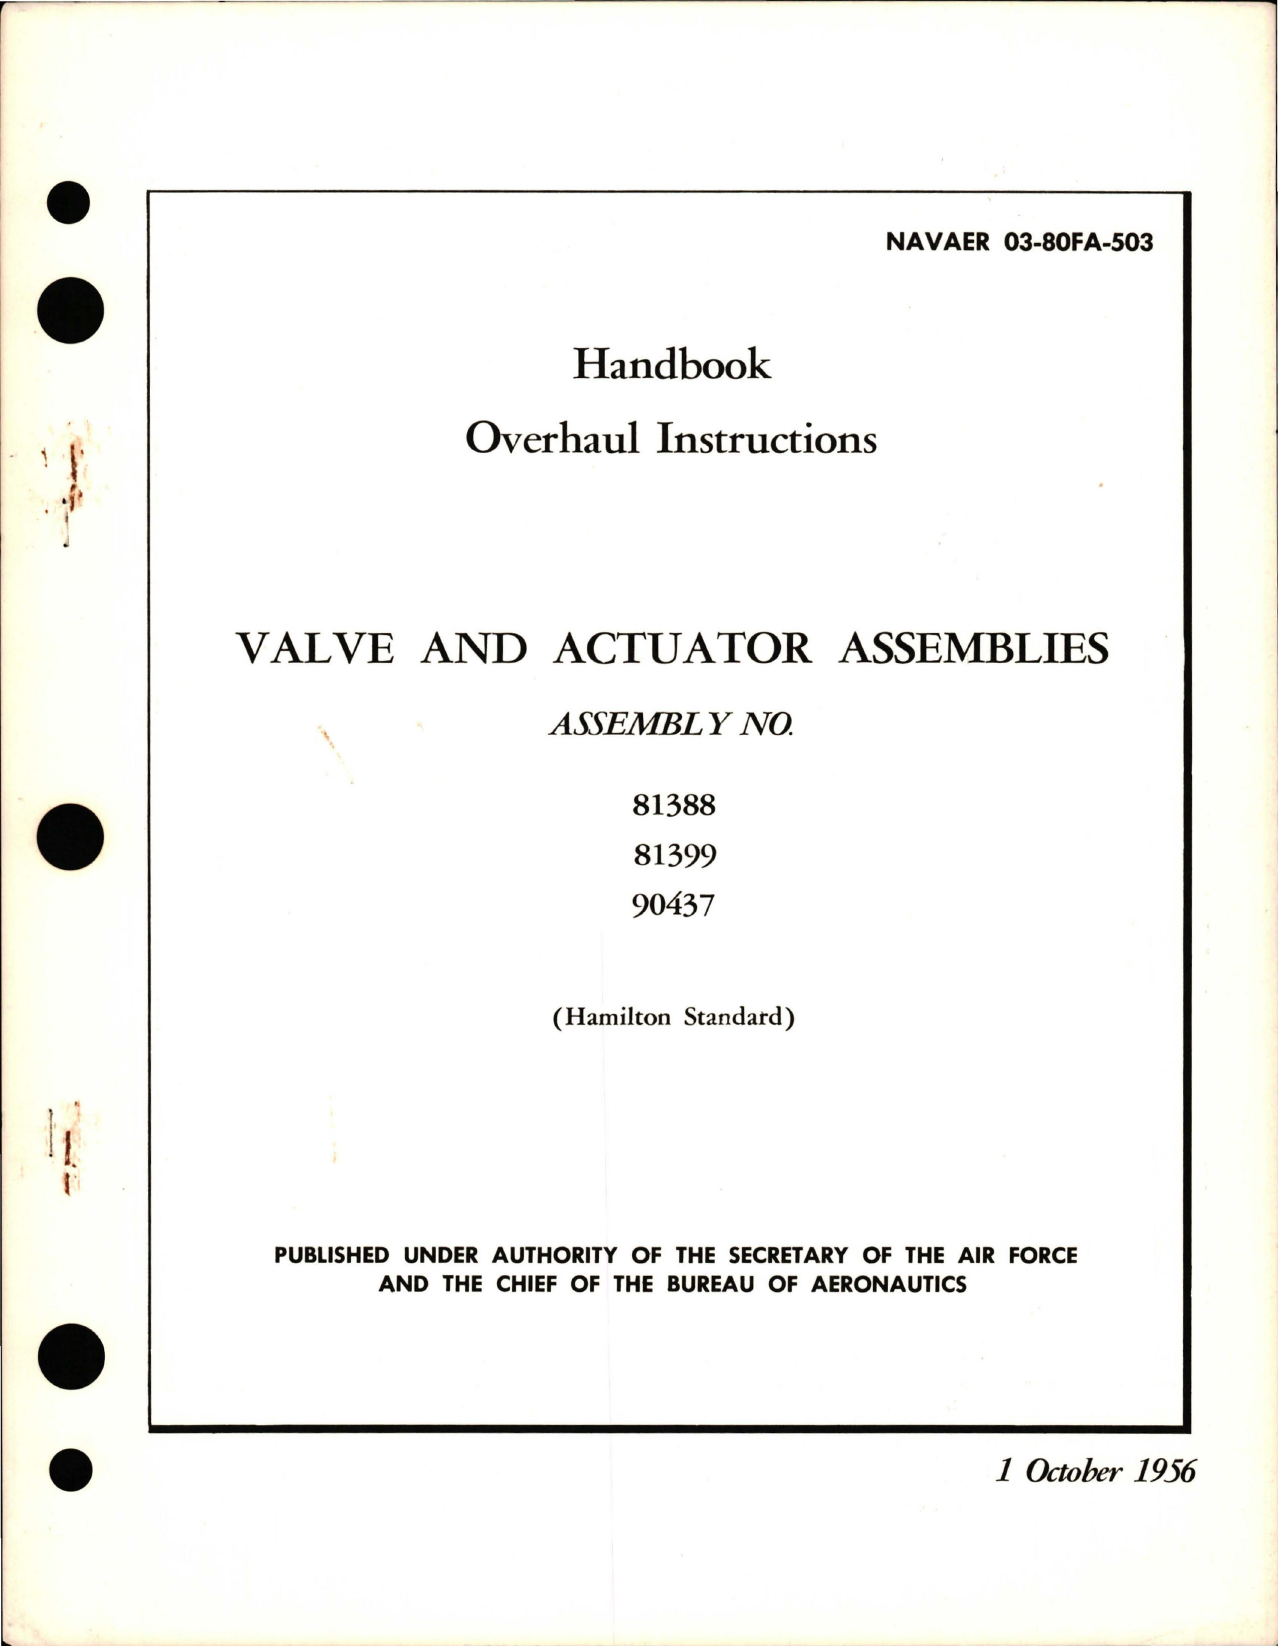 Sample page 1 from AirCorps Library document: Overhaul Instructions for Valve and Actuator Assemblies - Assembly No. 81388, 81399, and 90437